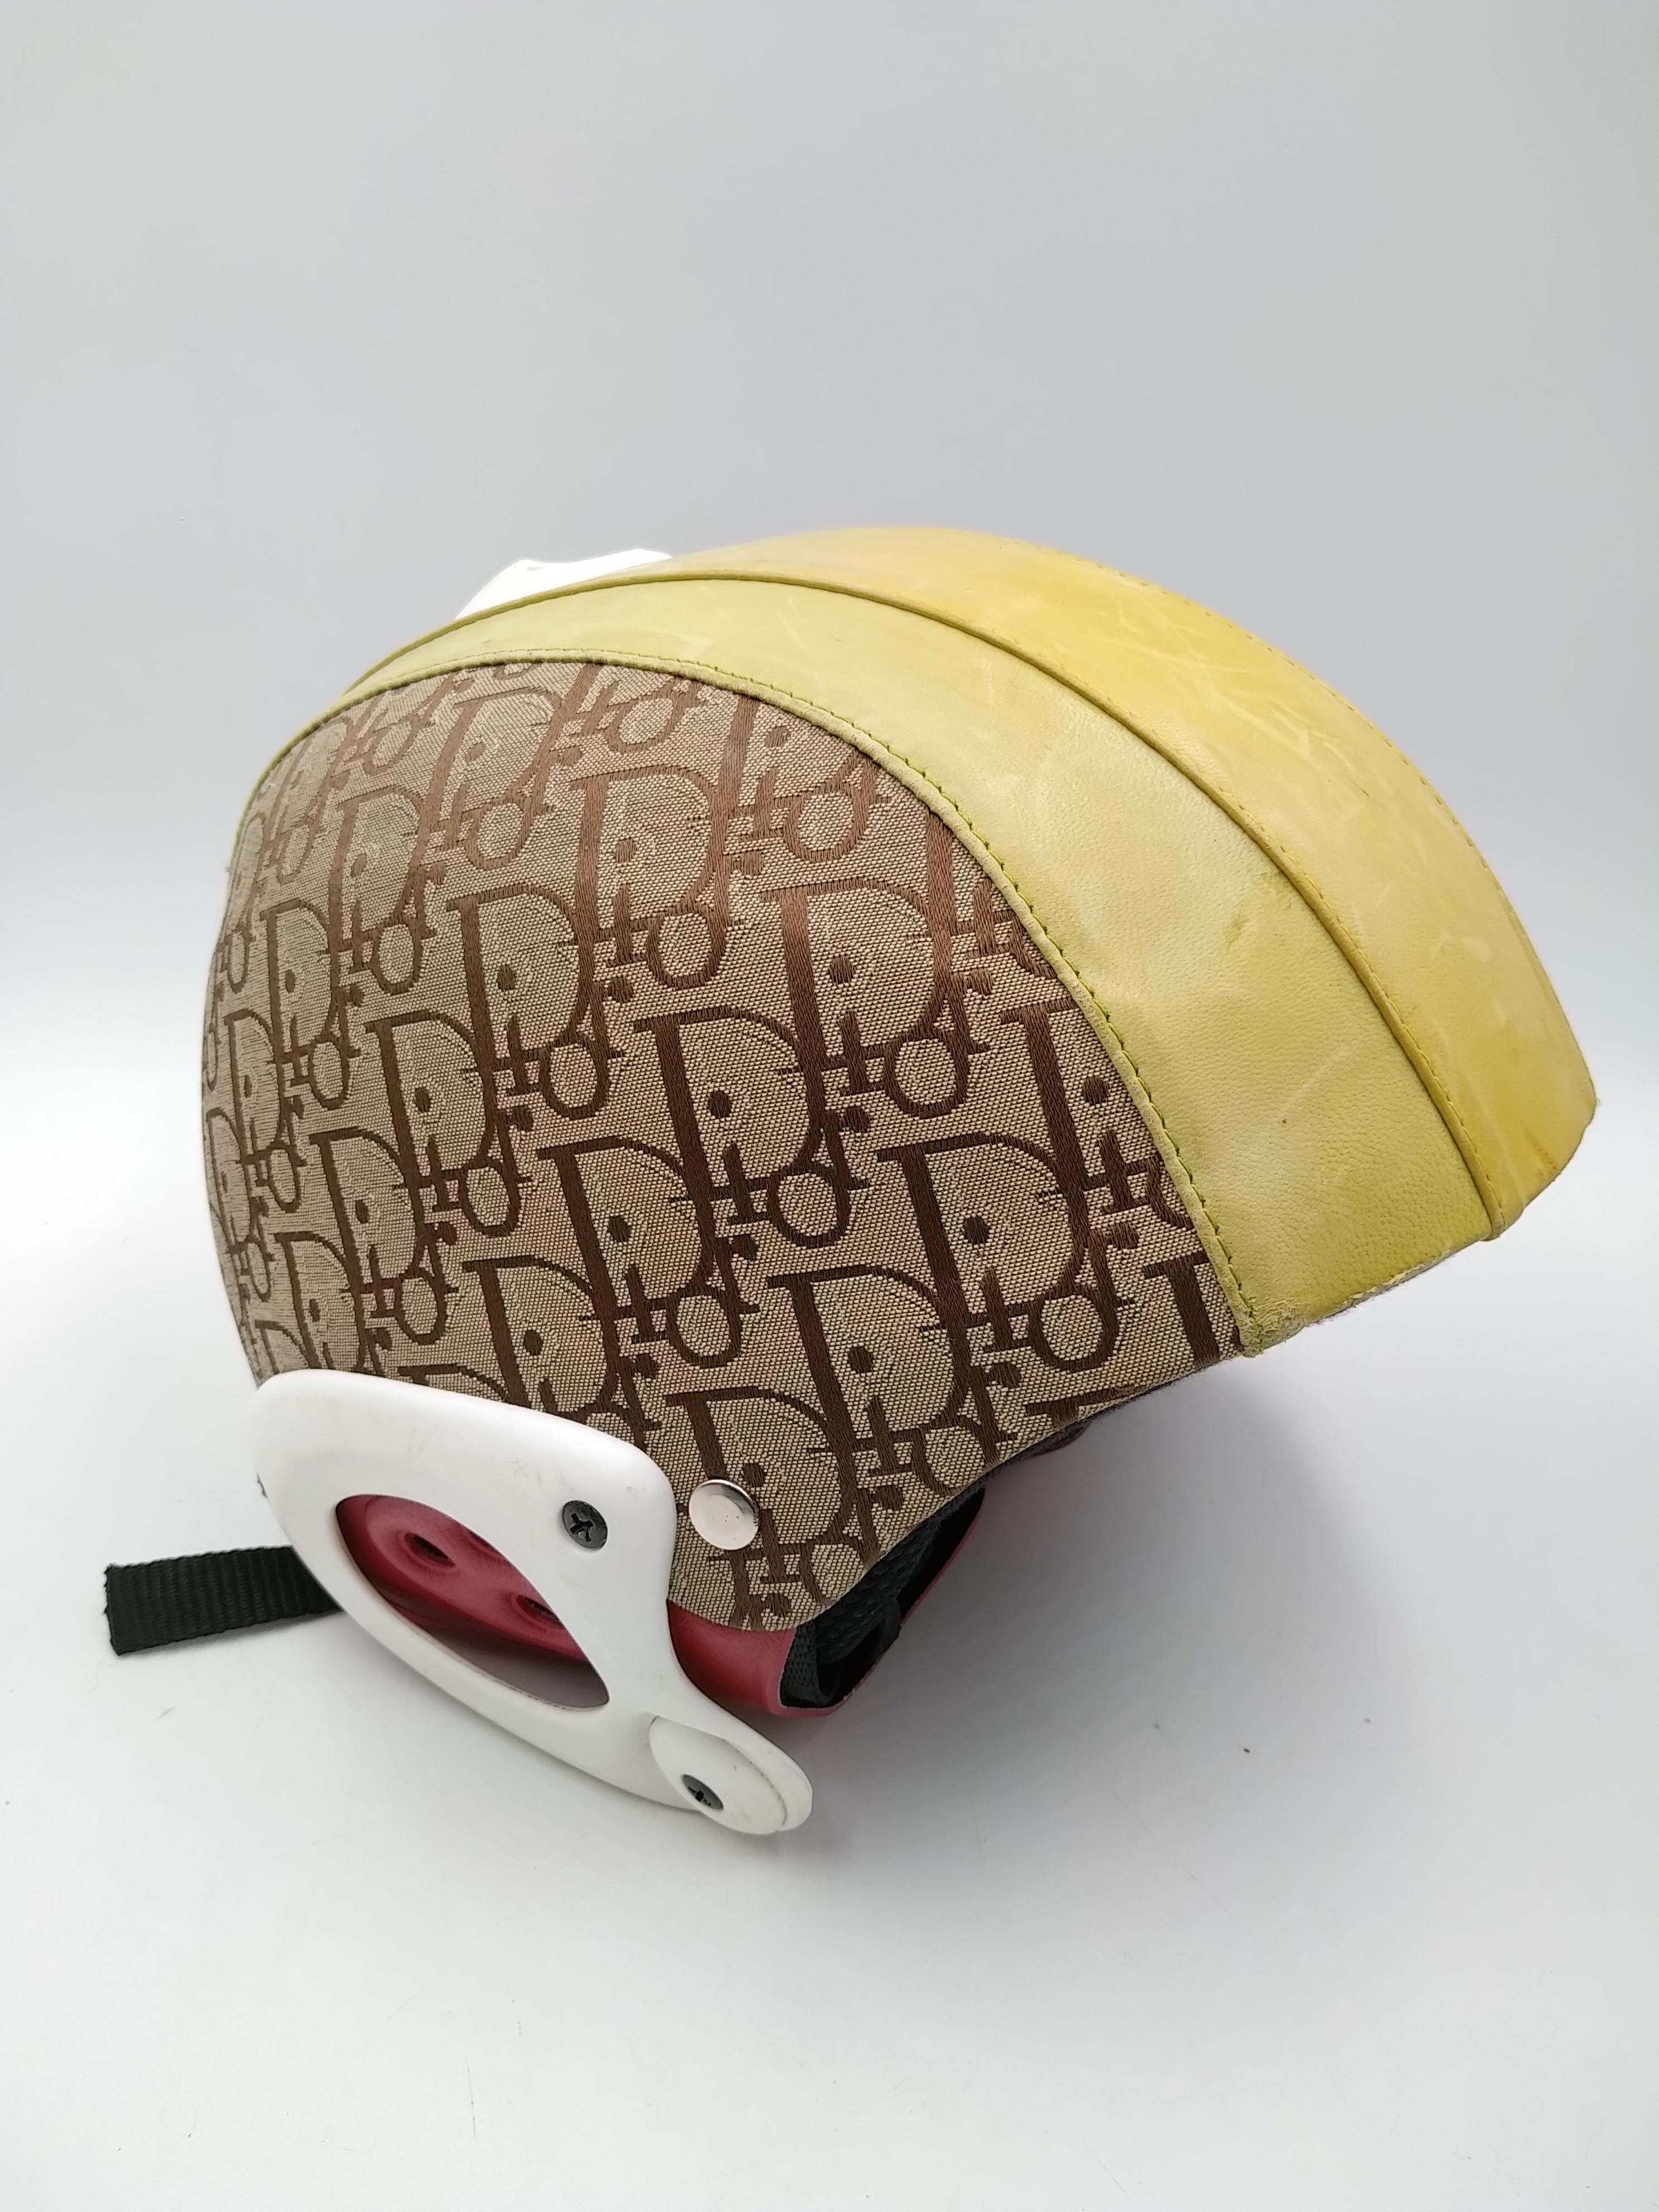 Christian Dior Limited edition Multicolor Rasta Trotter Alpine Sport Helmet, by John Galliano for the 2004 collection.
-100% authentic Christian Dior
- Chin strap Canvas & Leather
- For Alpine Sport 
- size L, 58/60
